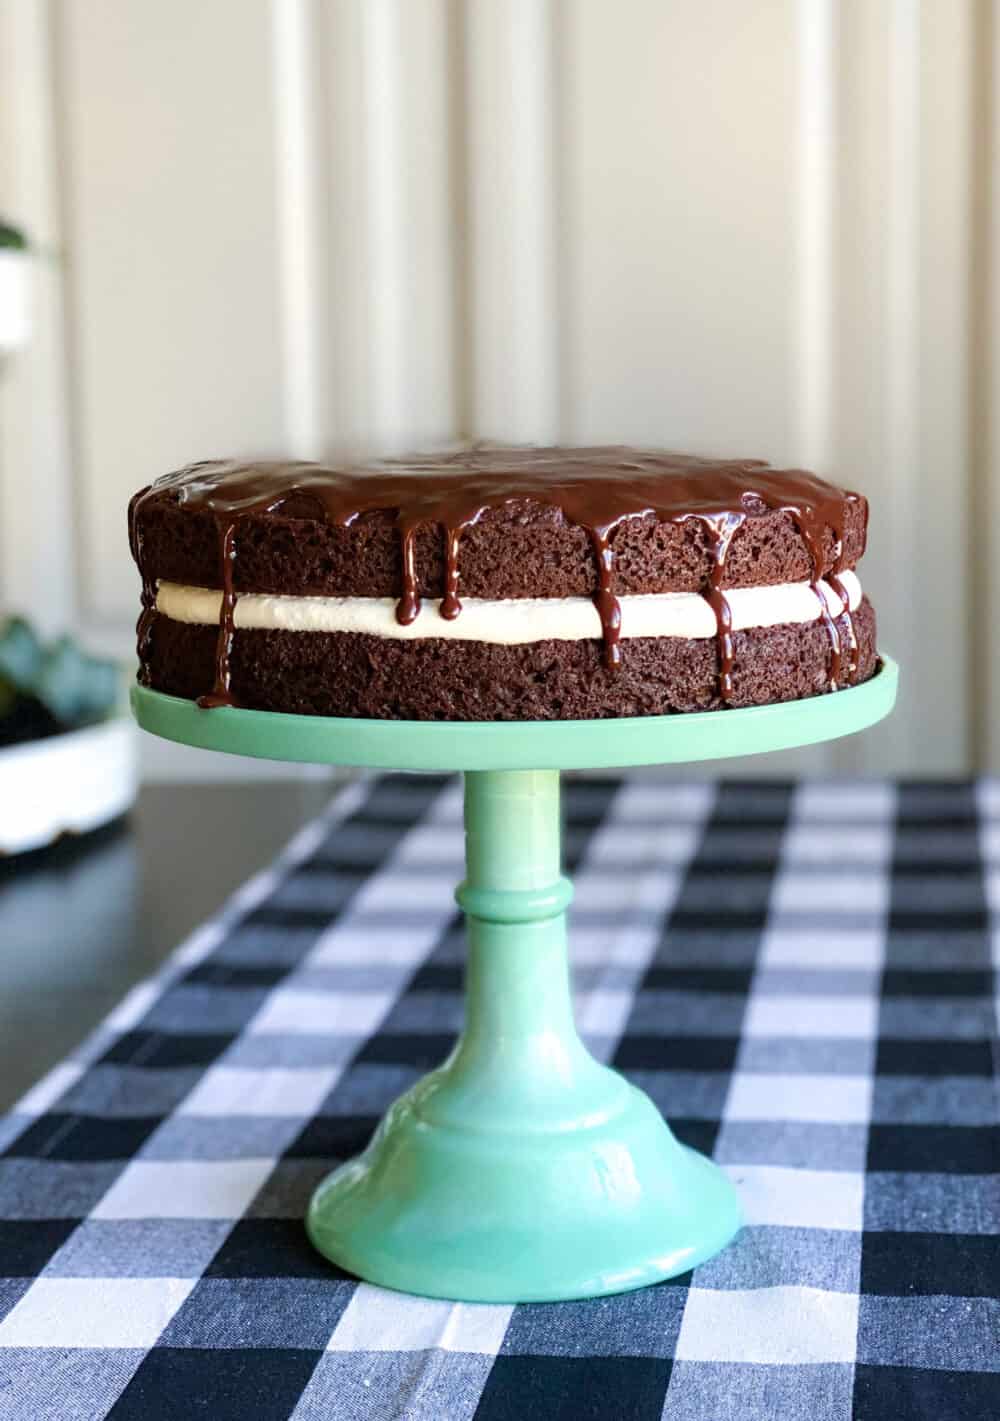 ding dong cake on cake stand